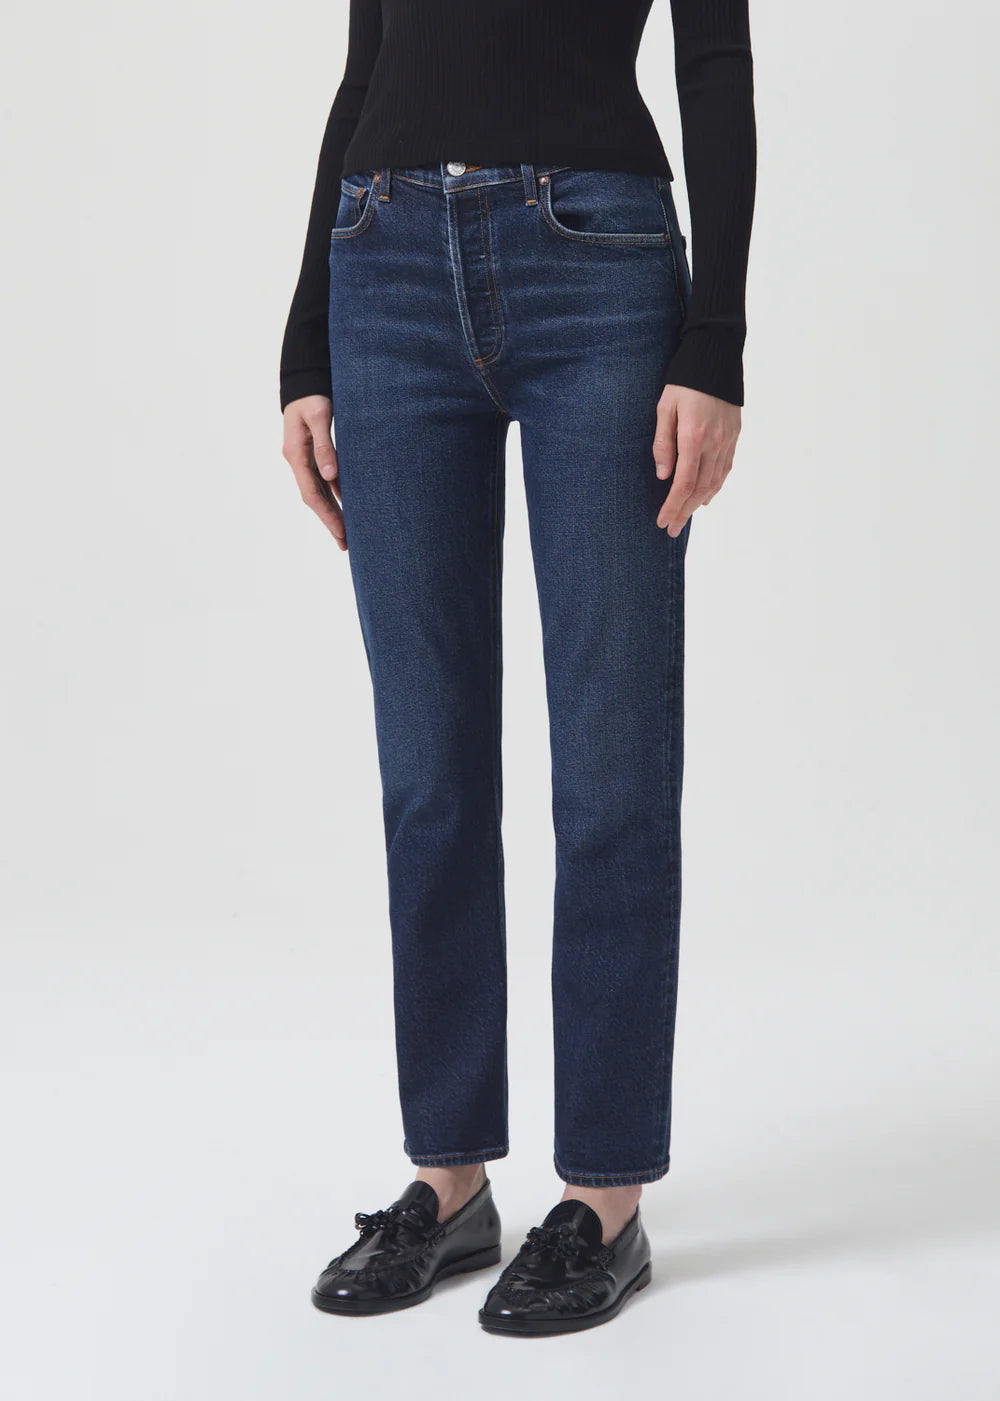 The model is wearing AGOLDE Riley Straight Long - Divided jeans and a black sweater.